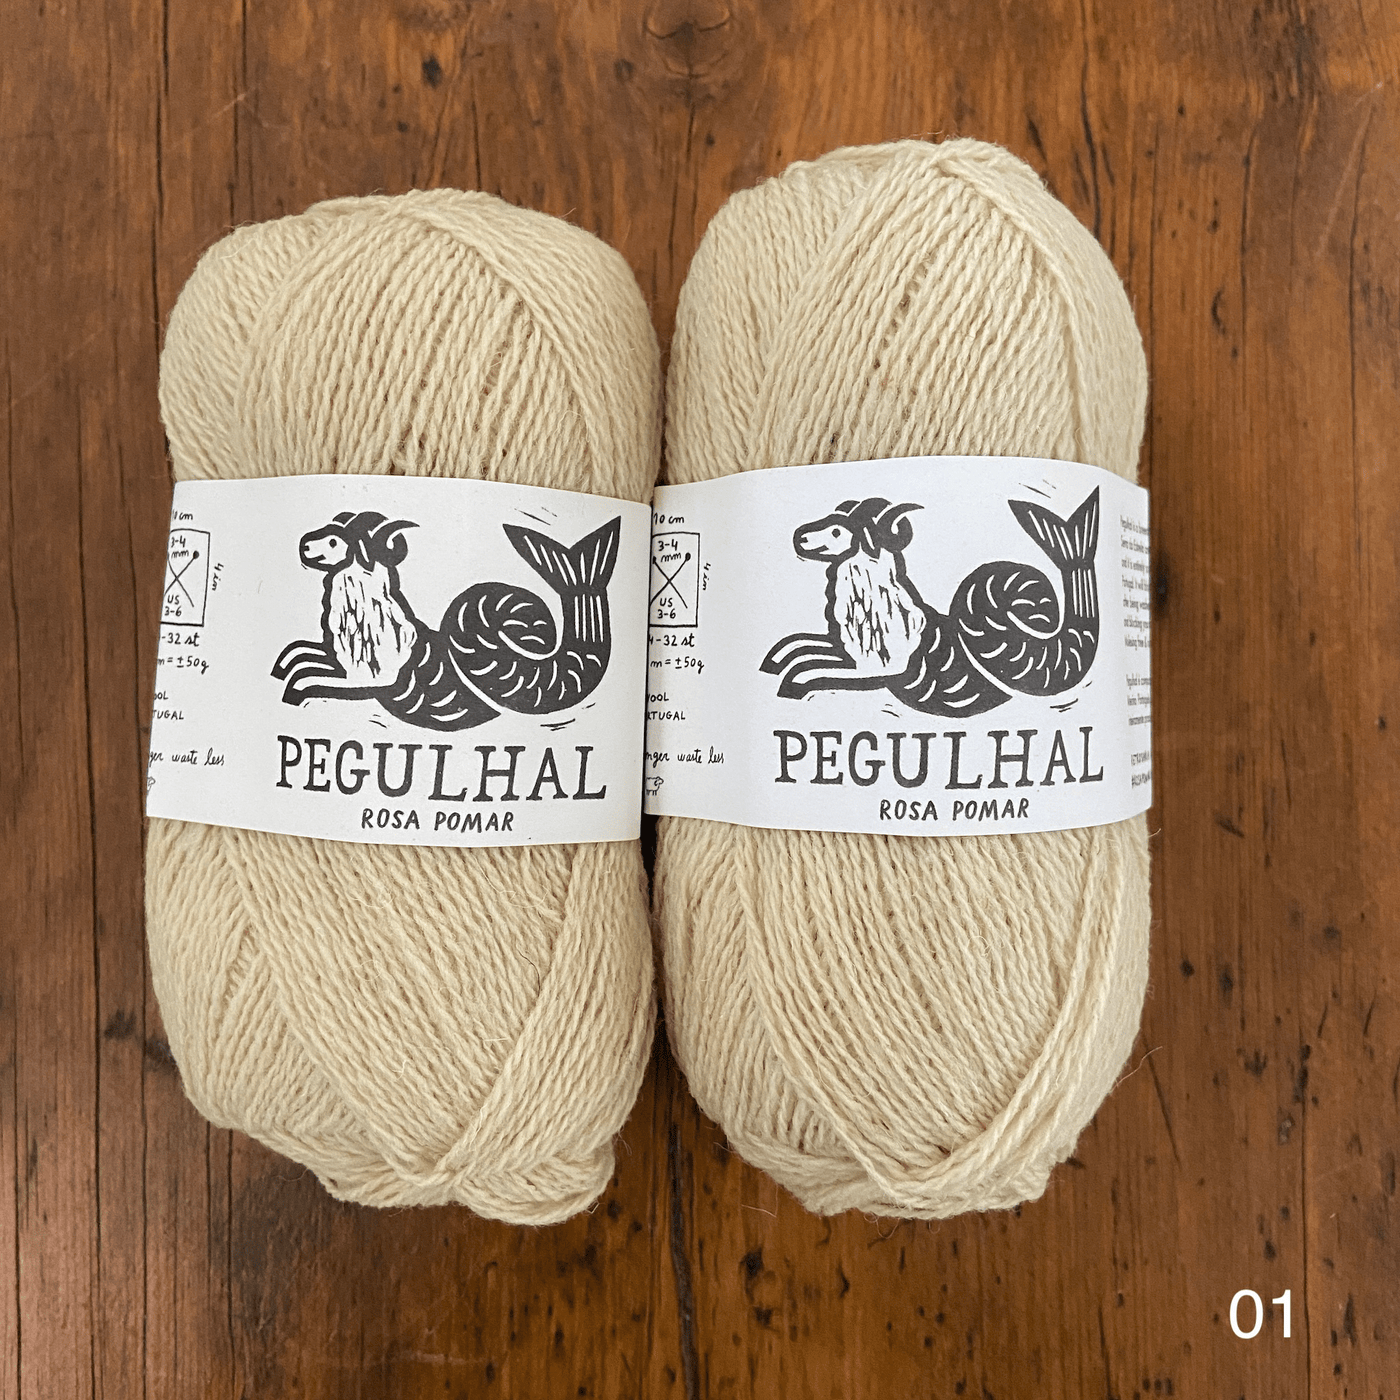 The Woolly Thistle's Retrosaria Pegulhal Fingering Weight Yarn in 01 (cream)